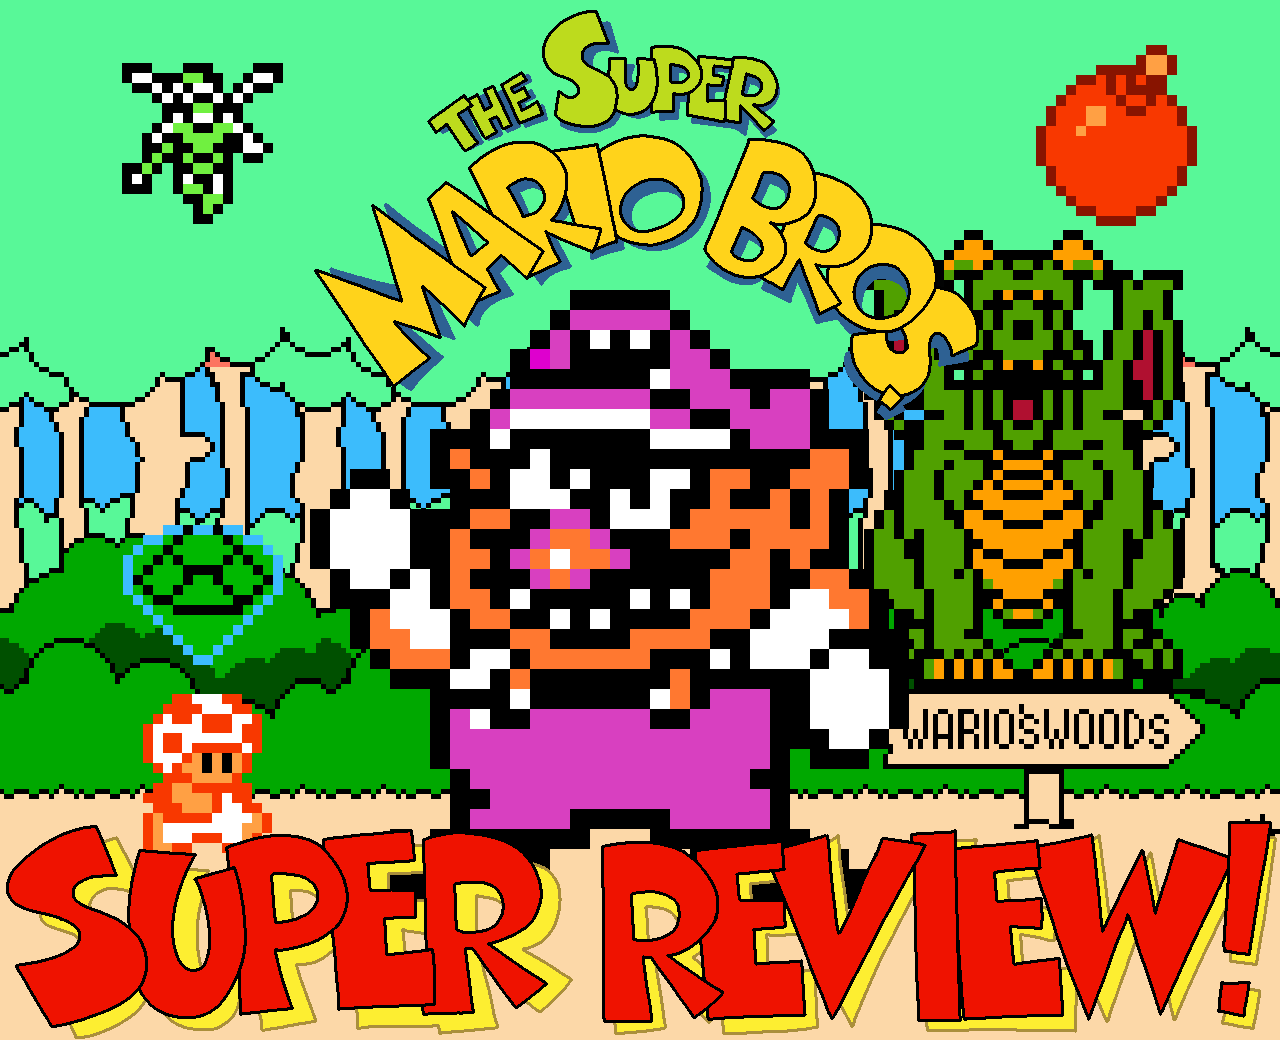 The Super Mario Bros. Super Review! (2021) - 14. Wario's Woods.png